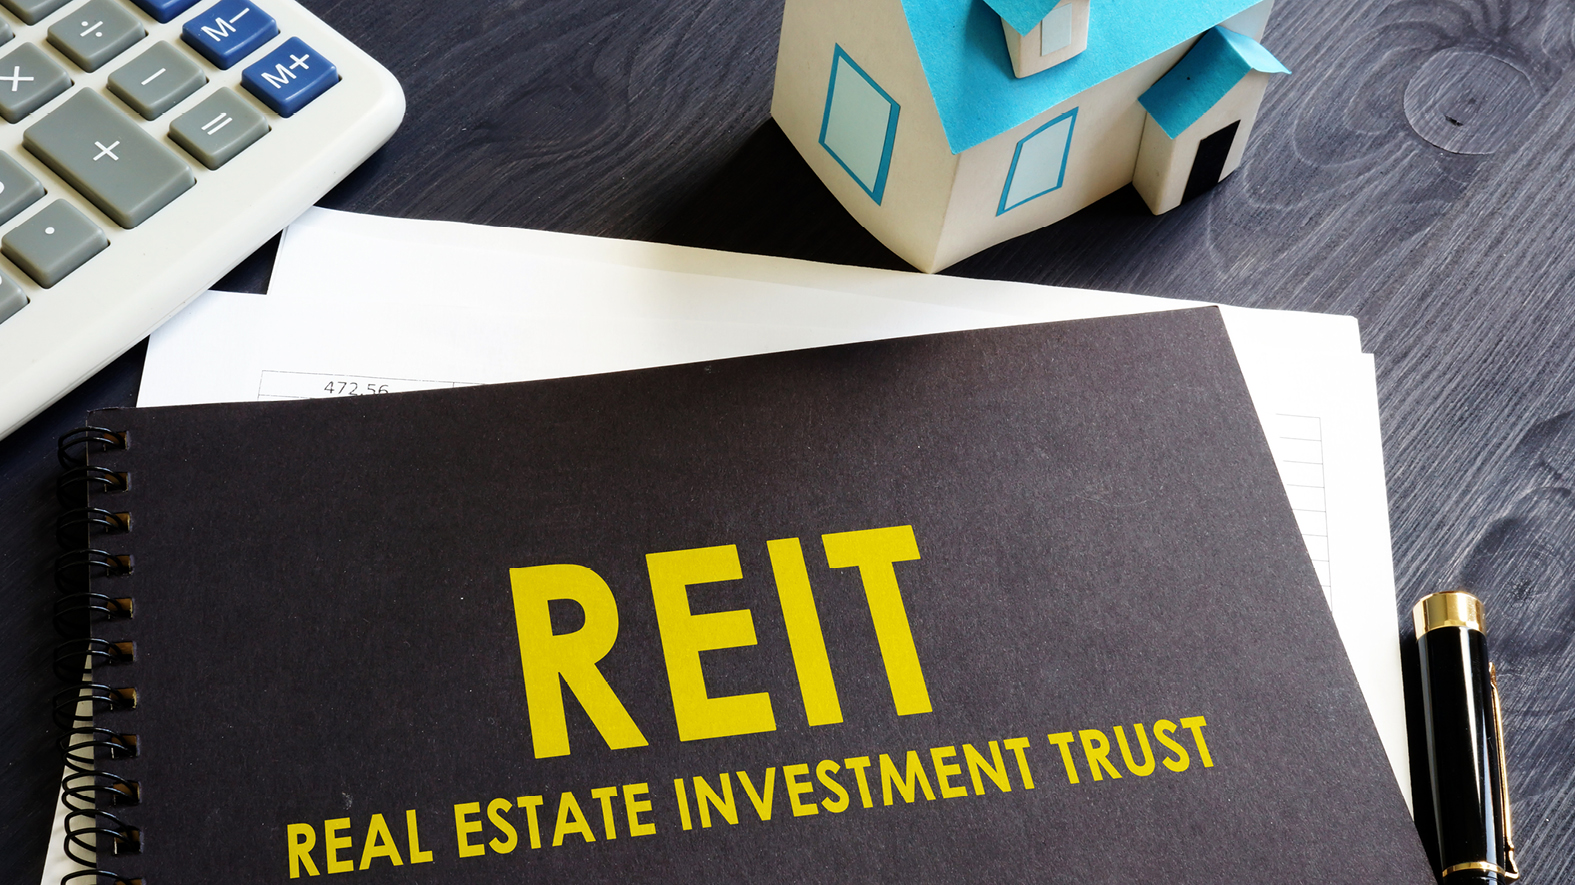 A black folder labeled REIT (Real Estate Investment Trust) in yellow type on a desk with a calculator and a toy house